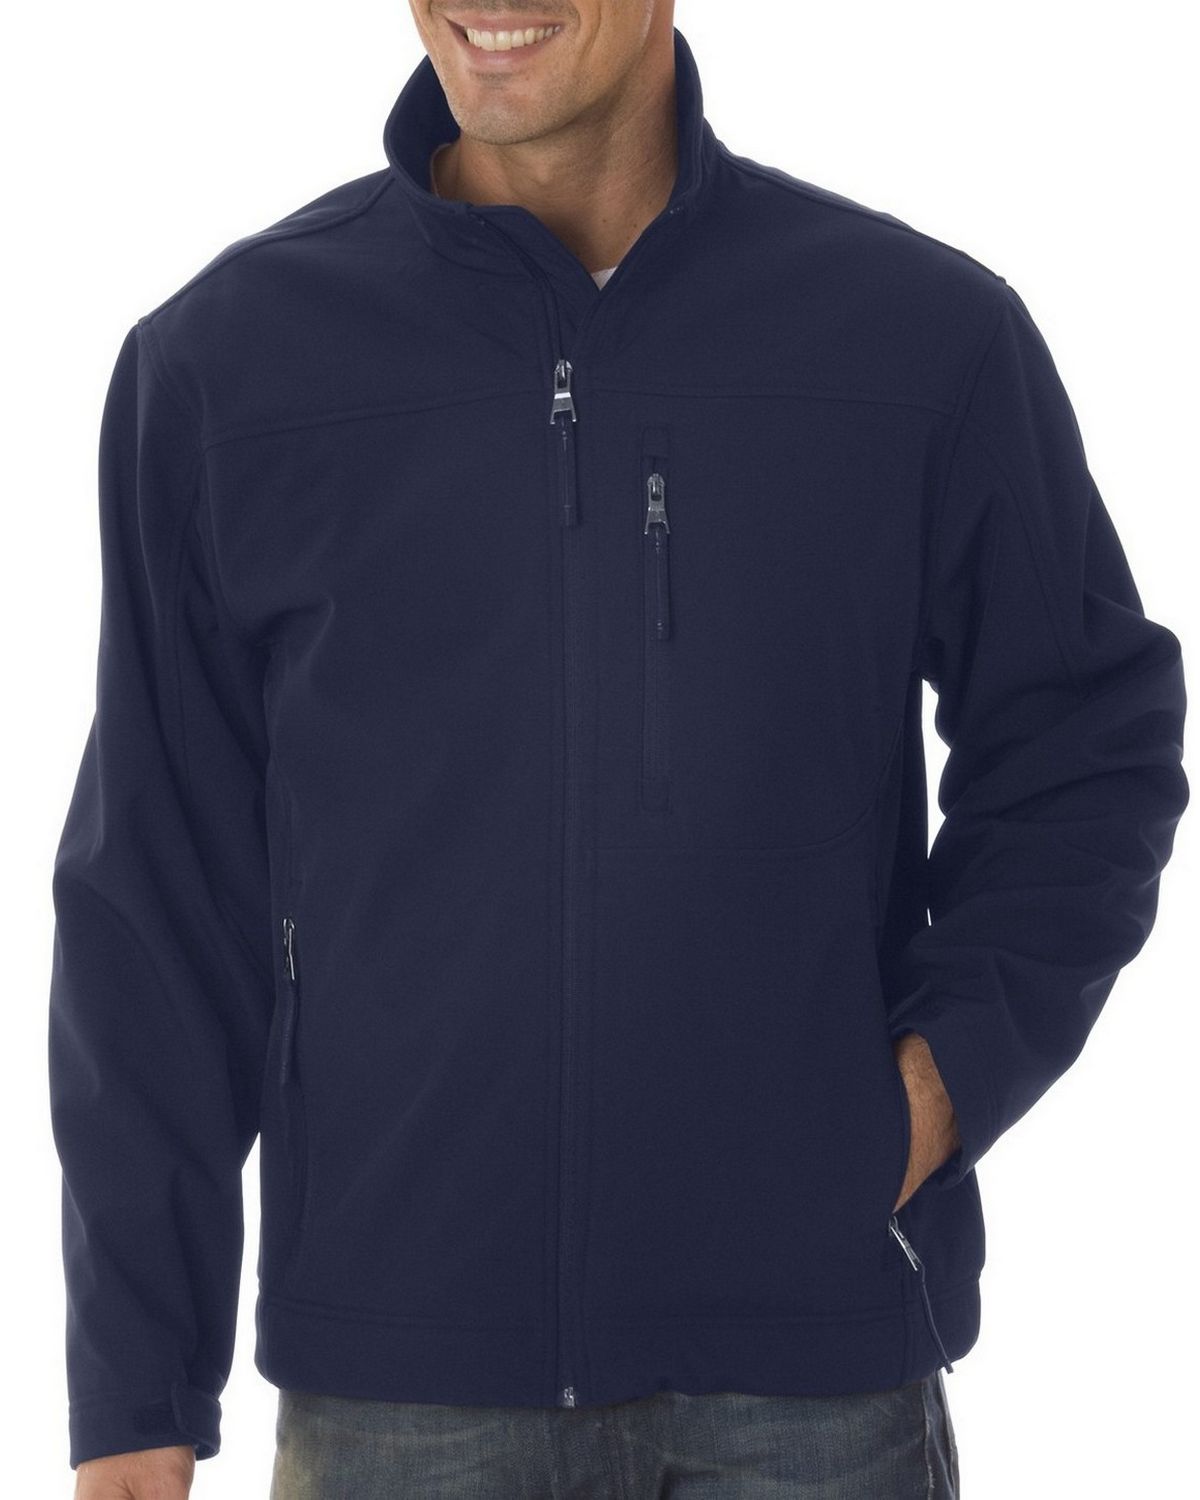 Buy Weatherproof 6500 Soft Shell Jacket - Free Shipping Available